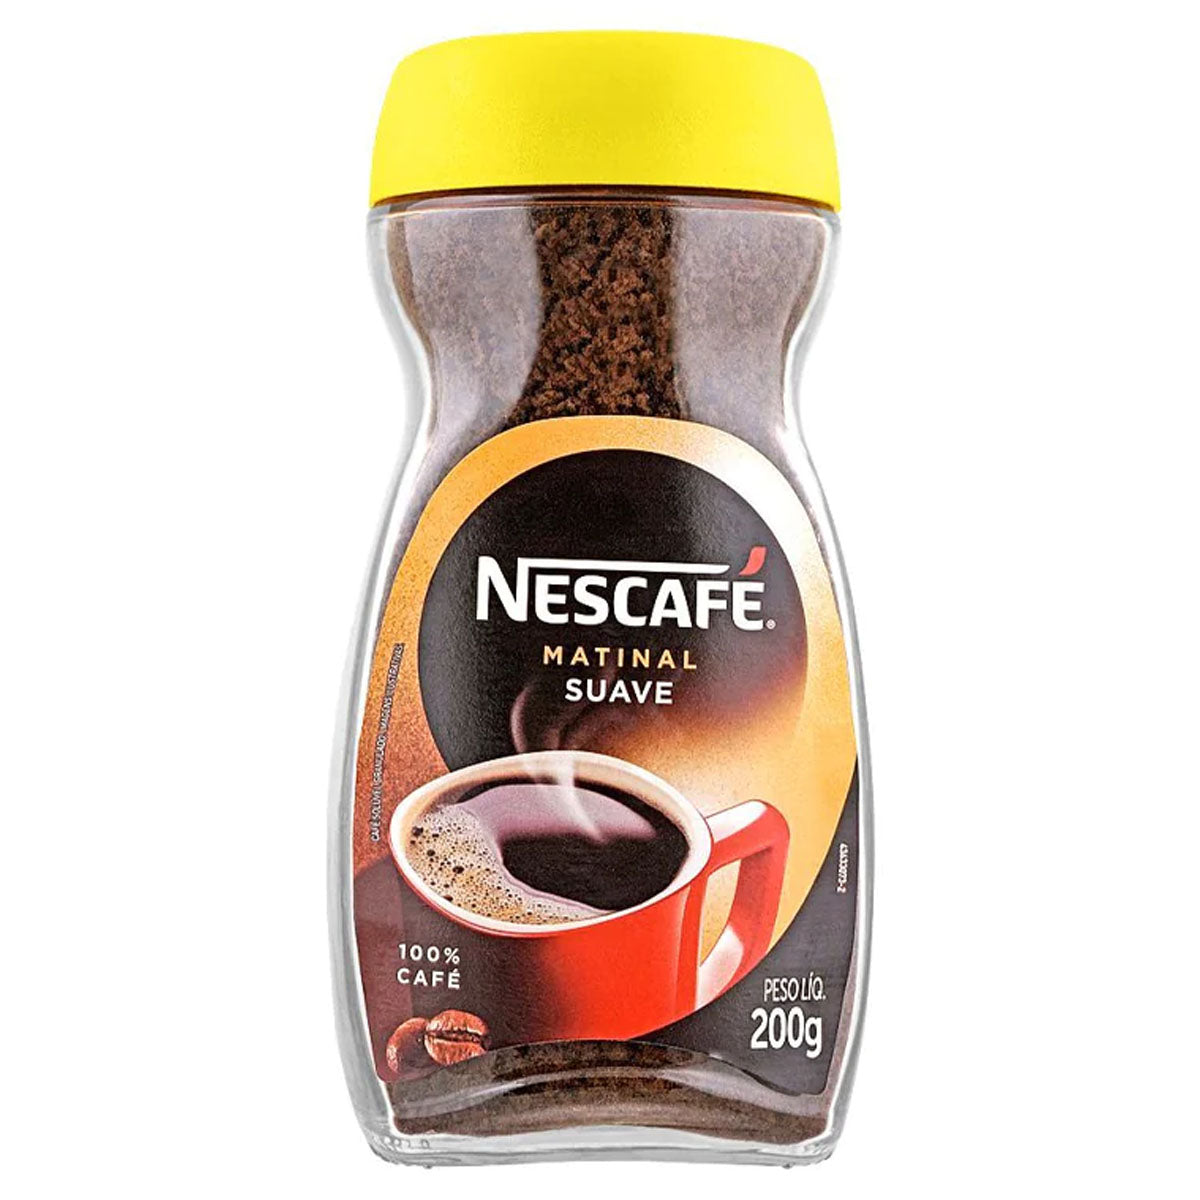 Nescafe Instant Coffee - 200g in a jar on a white background.